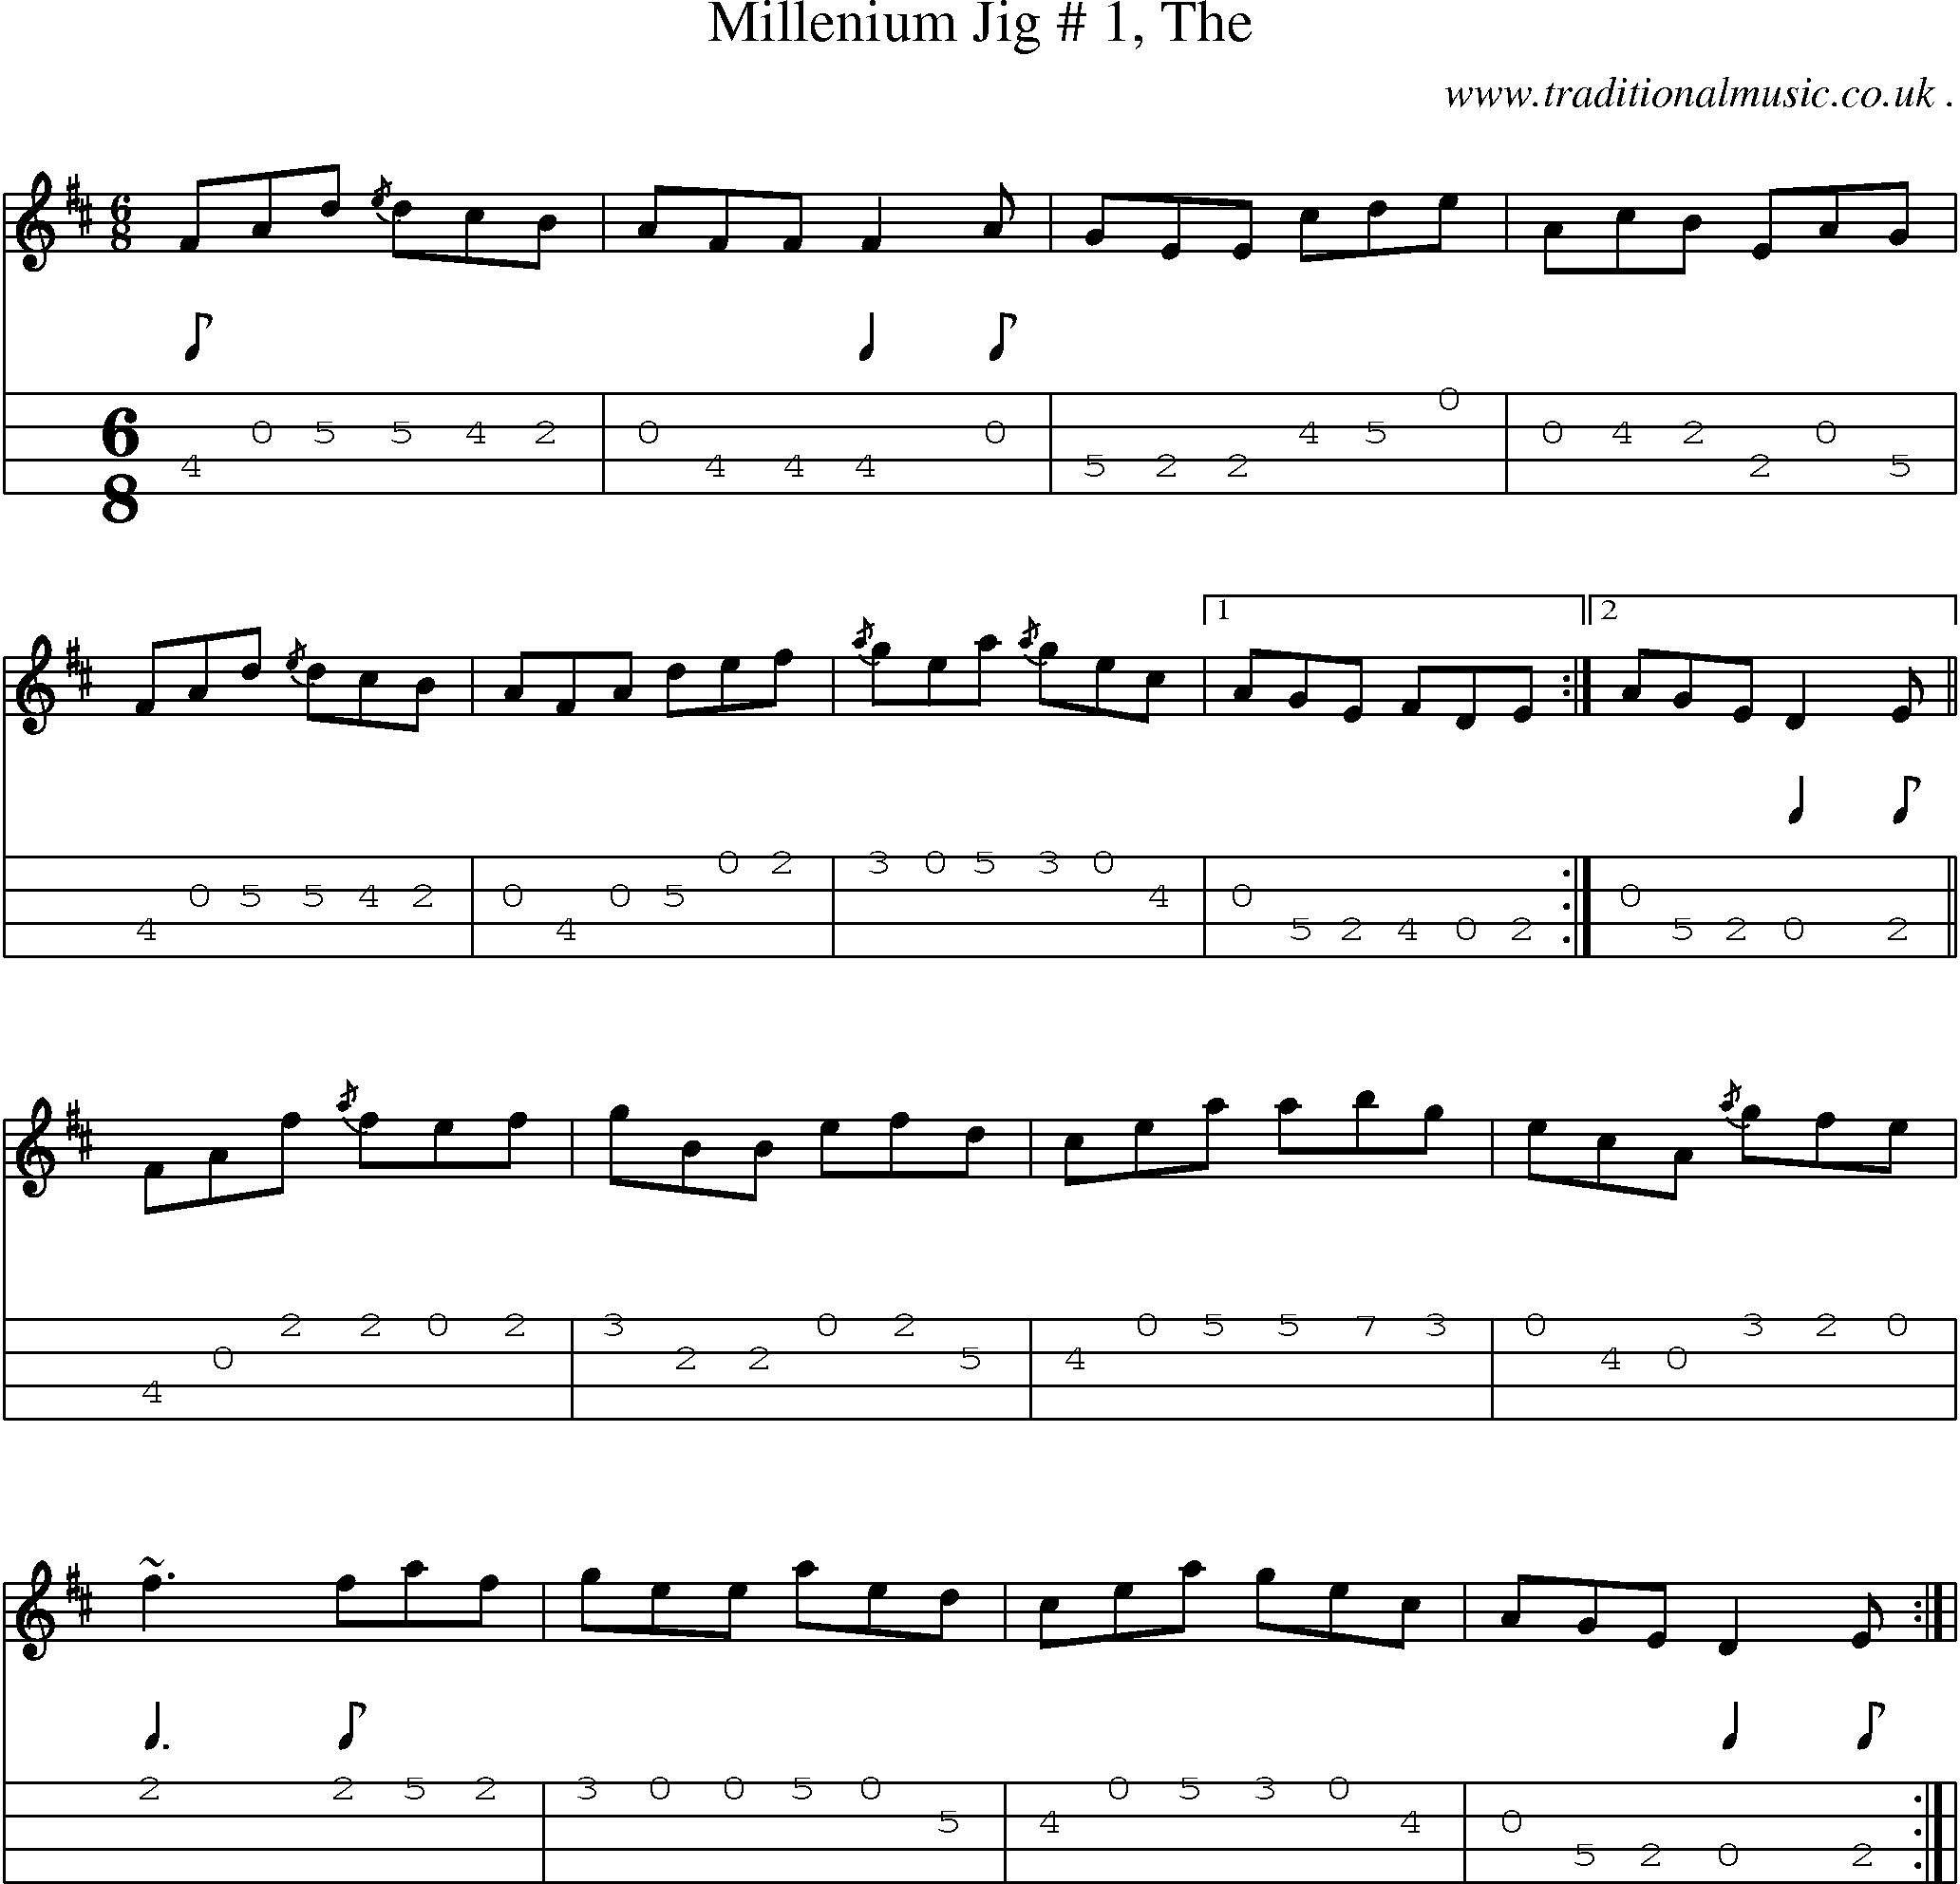 Sheet-music  score, Chords and Mandolin Tabs for Millenium Jig  1 The